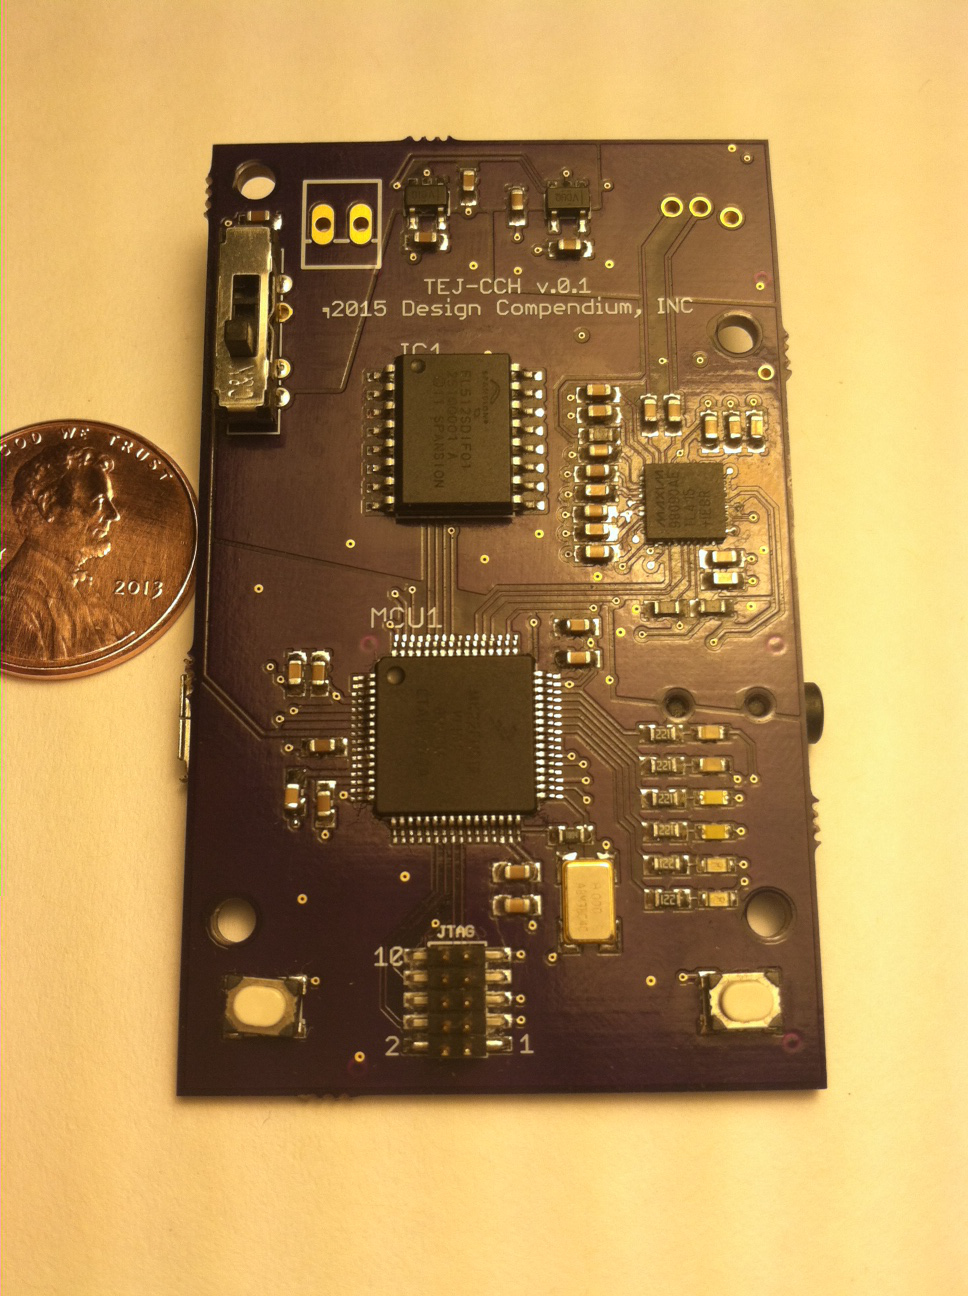 Embedded-DSP Project designed/assembled by Bosley